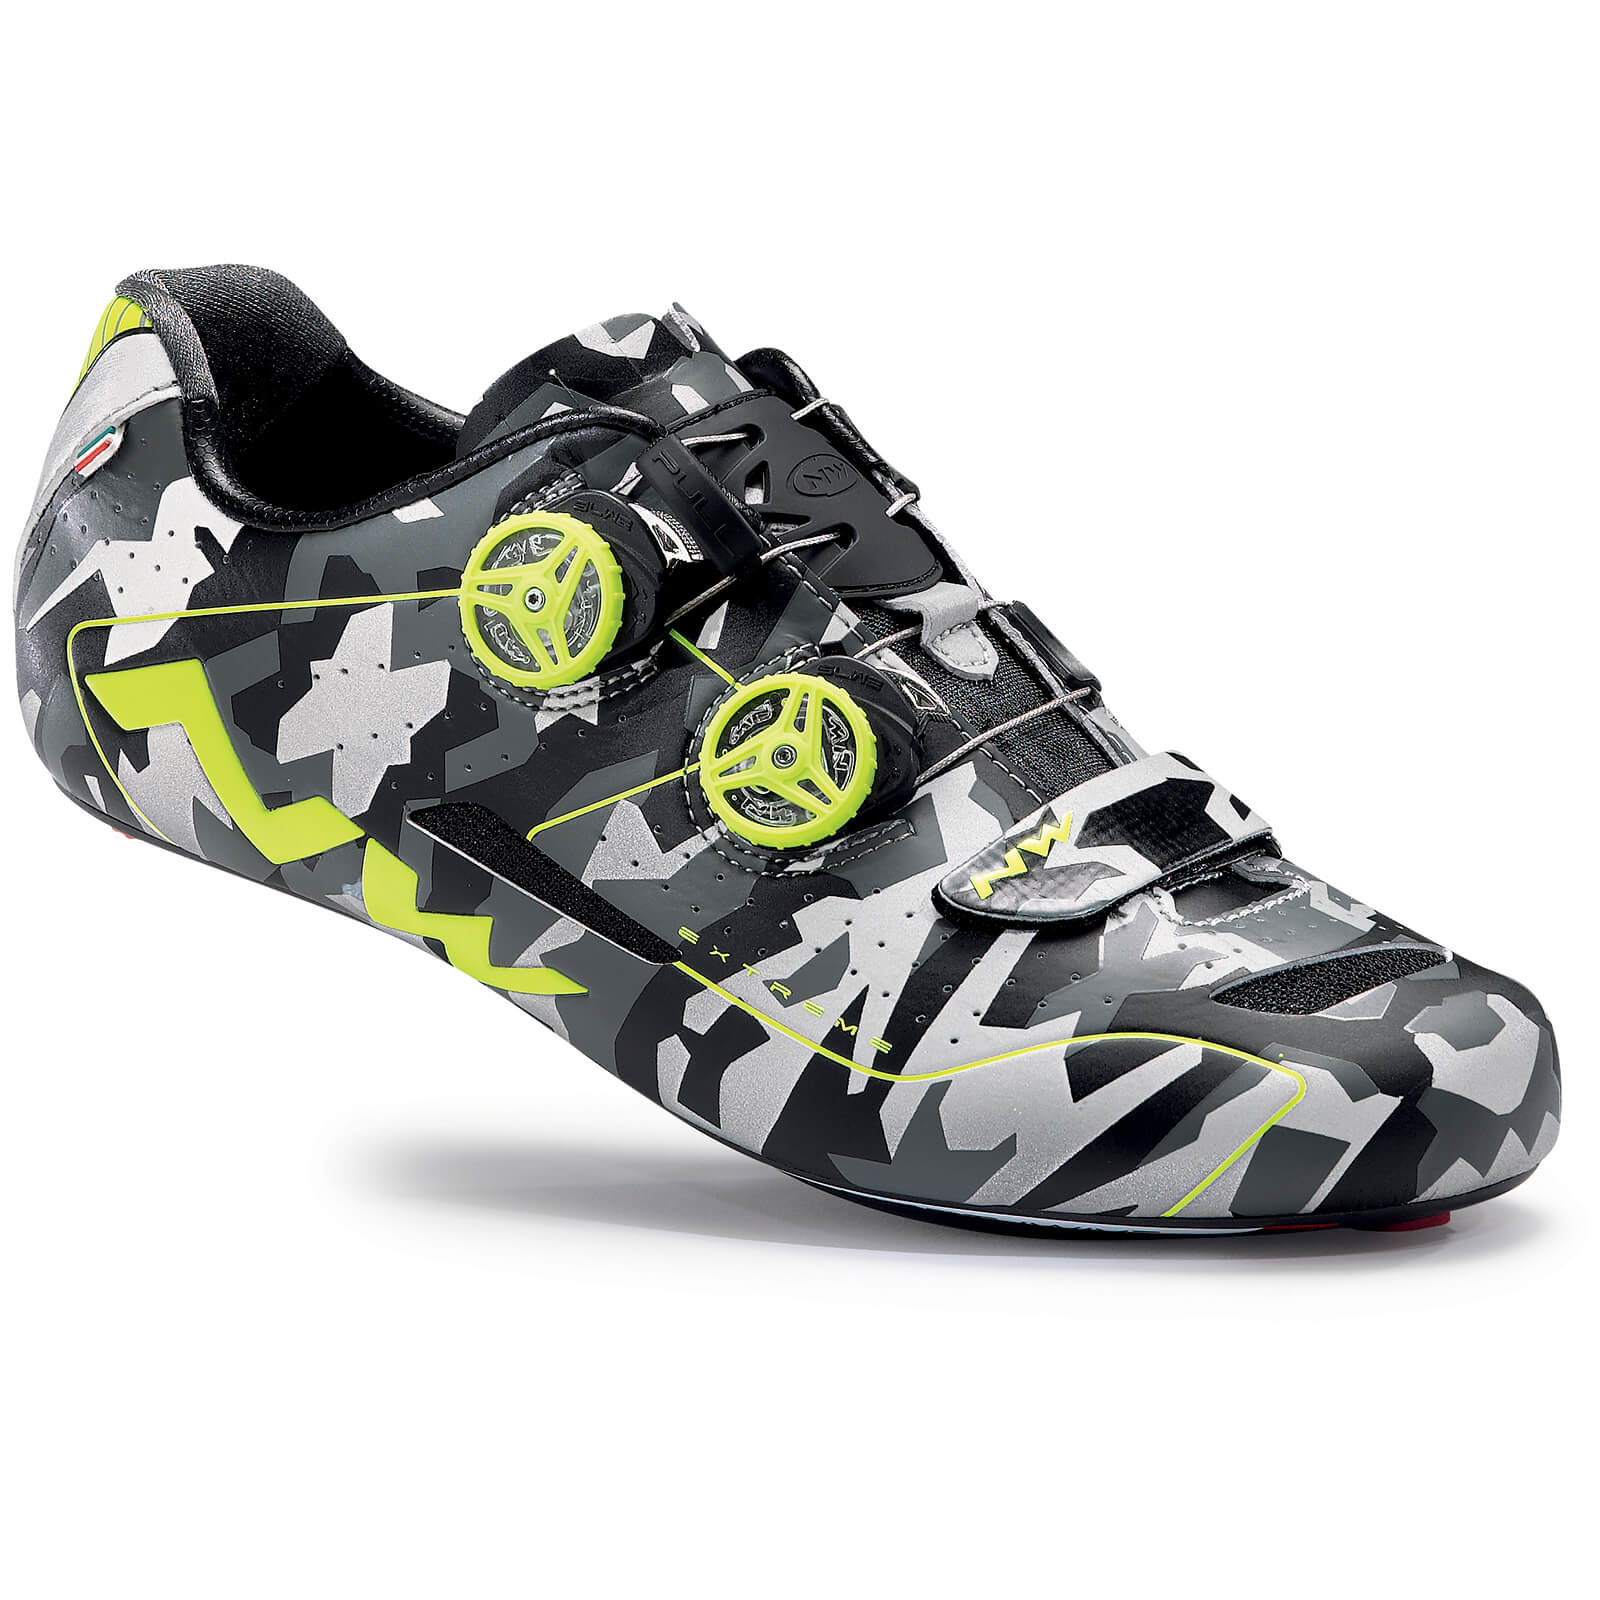 northwave extreme cycling shoes